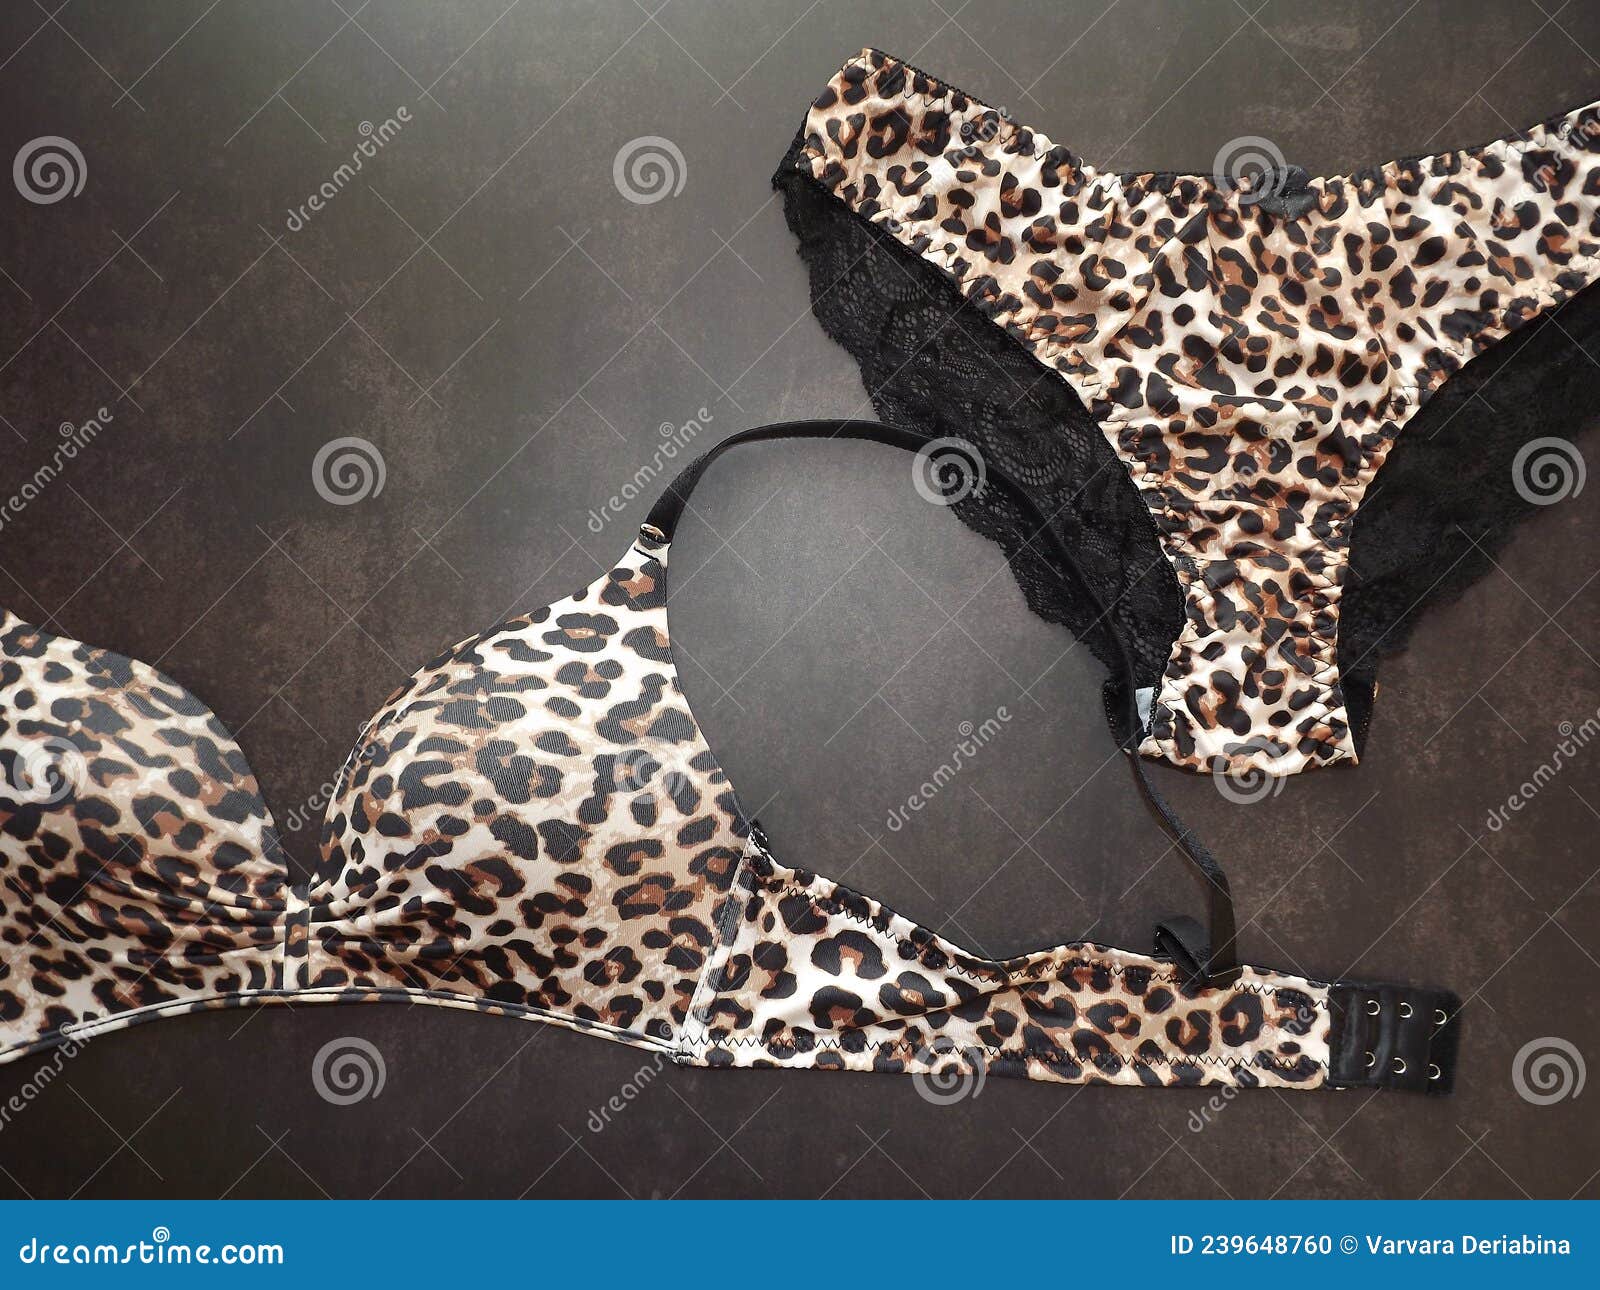 Leopard Lingerie Set with Lace Panties on Black Background Stock Photo -  Image of night, adult: 239648760